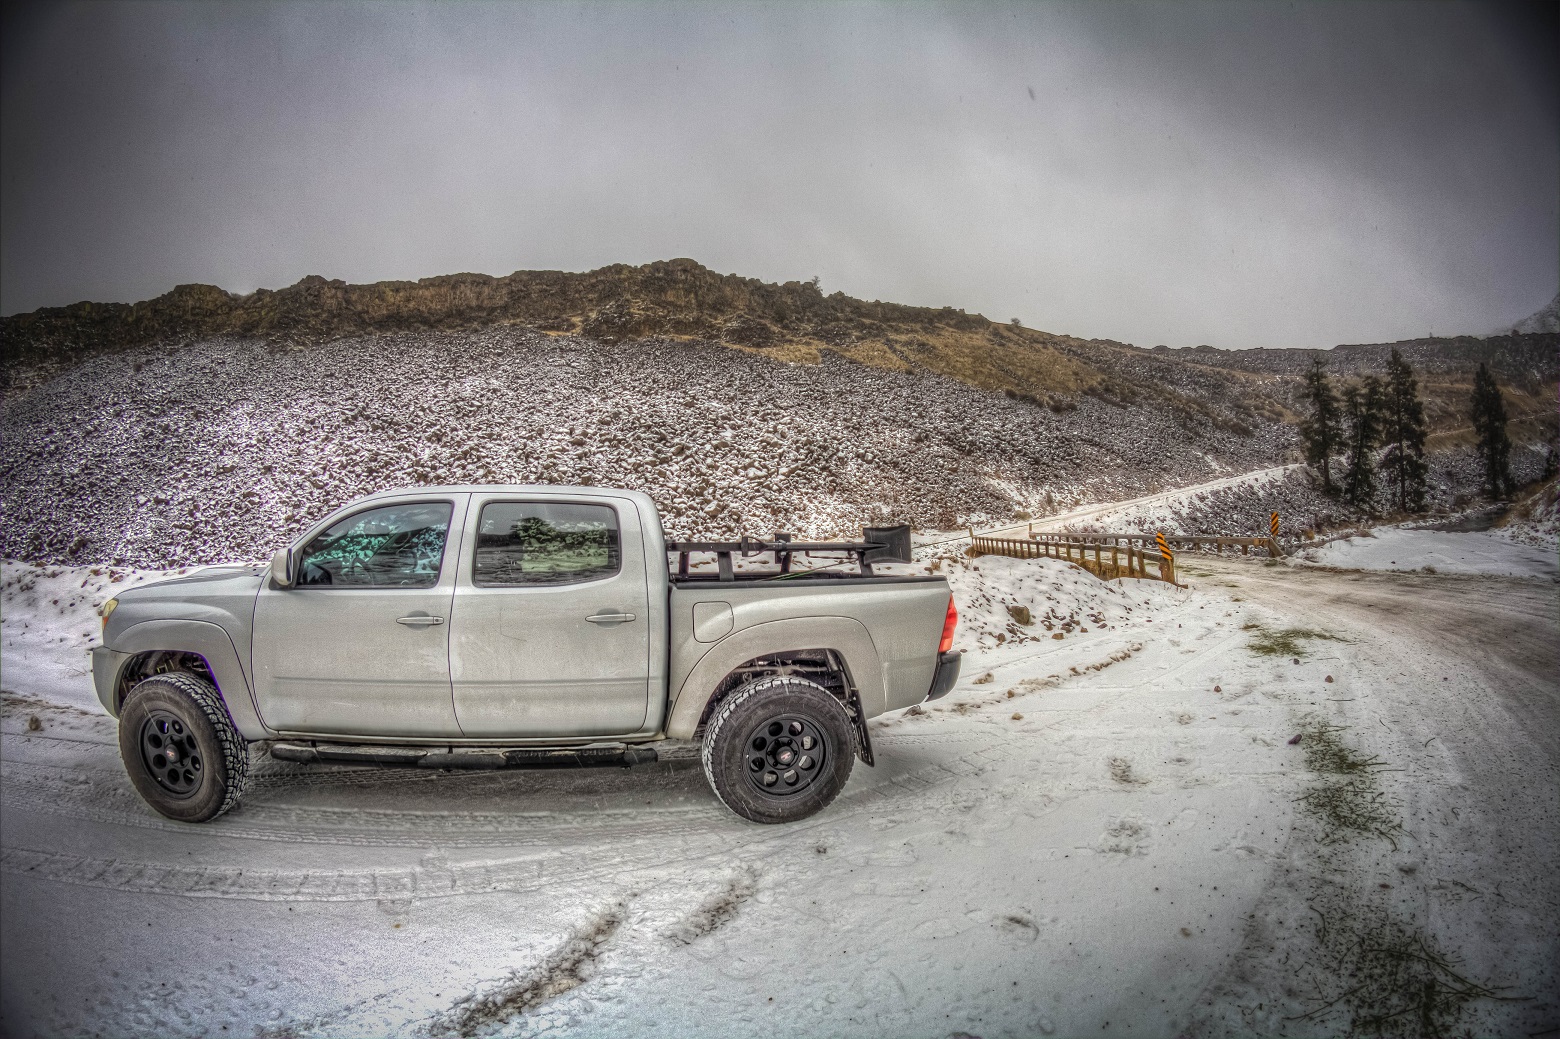 Toyota Tacoma Truck in the snow - Winter driving tips - The Miller Insurance Agency Everett Washiington